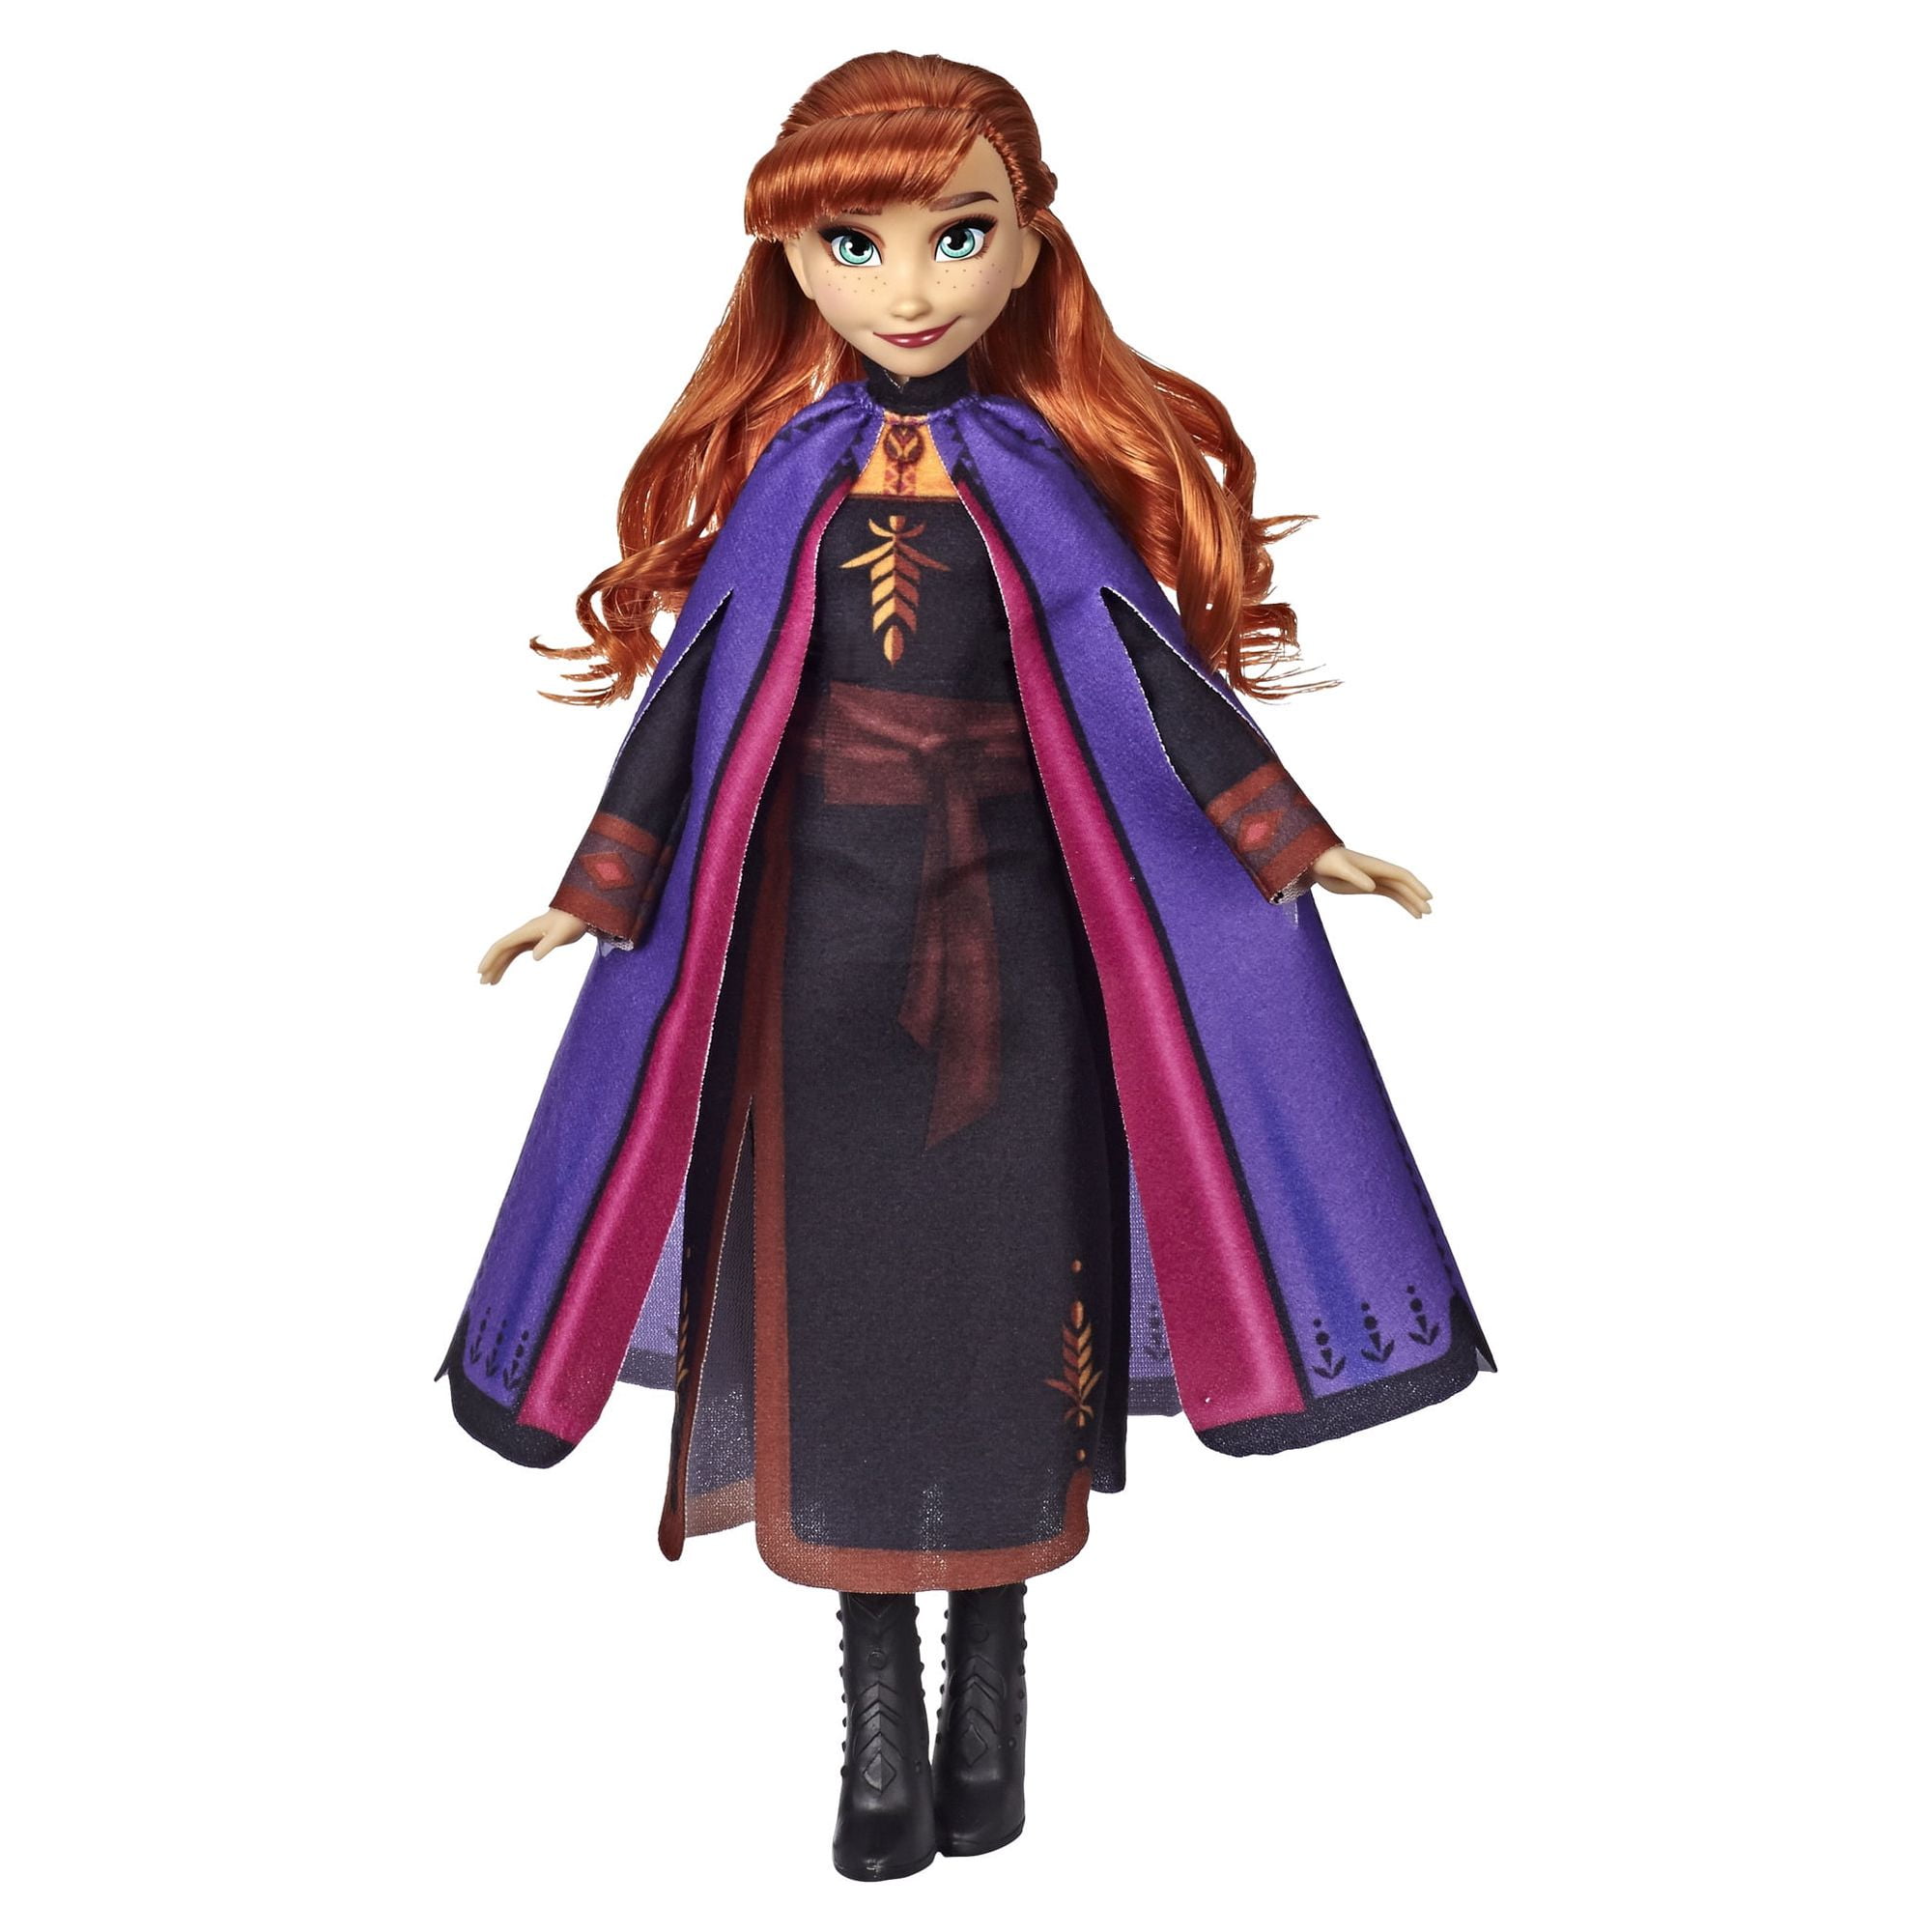 abegail taruc add photo images of anna from frozen 2